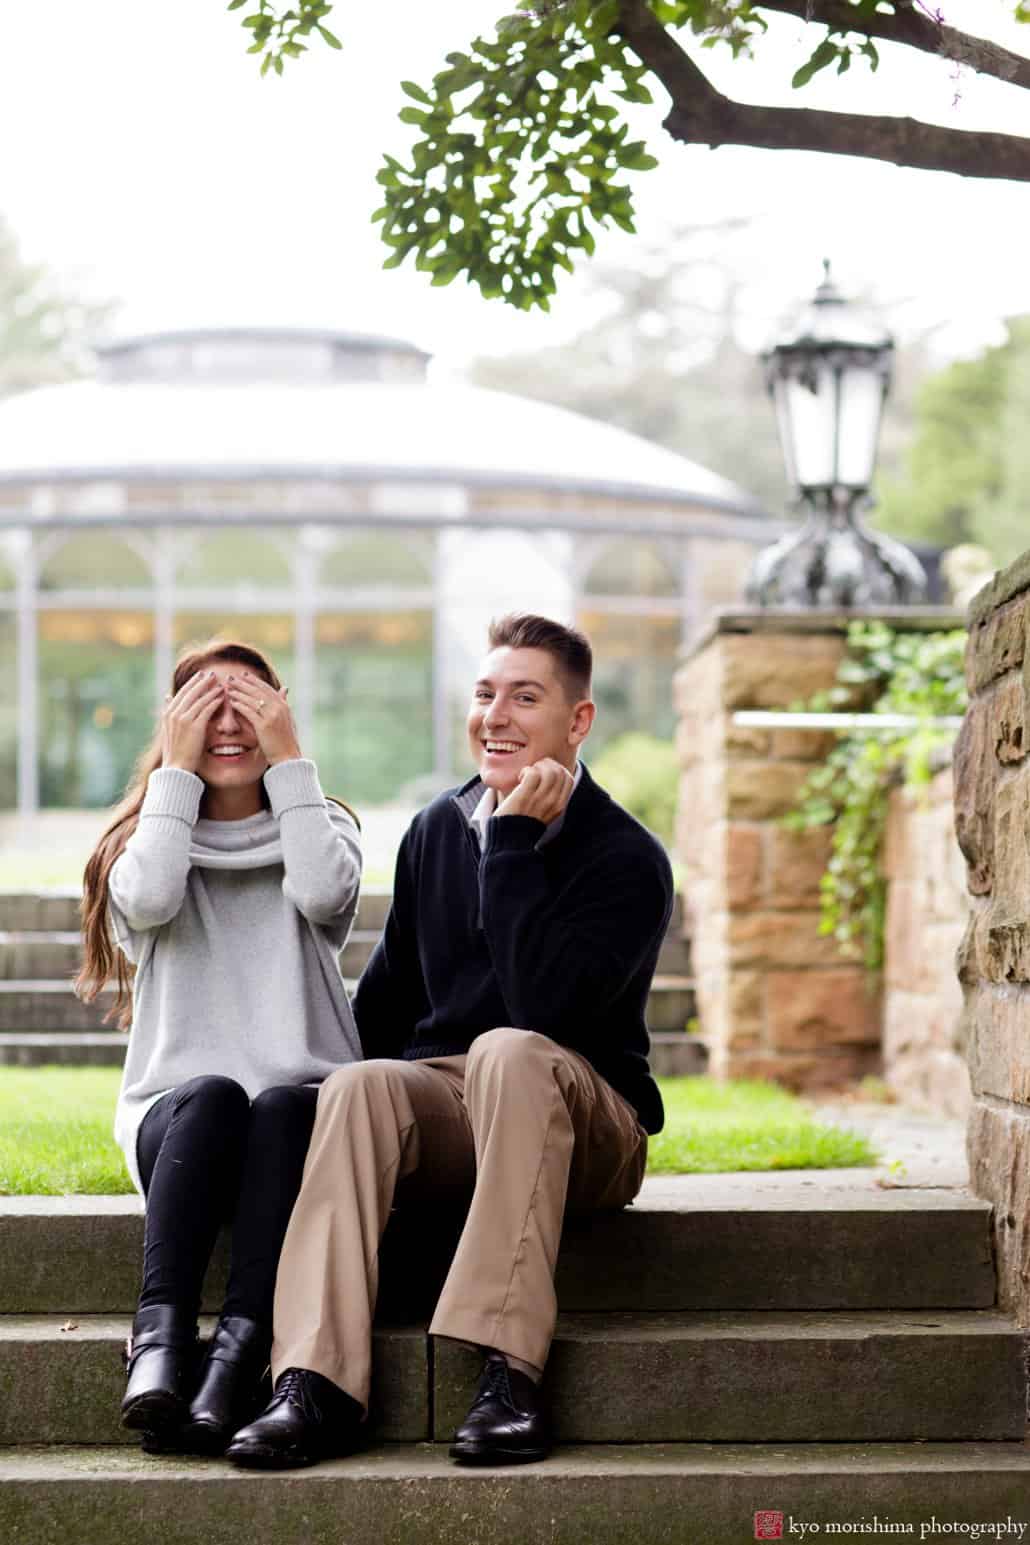 Unique engagement photo as woman covers her eyes and fiancé smiles at camera, photographed at Jasna Polana with glass ballroom in the background